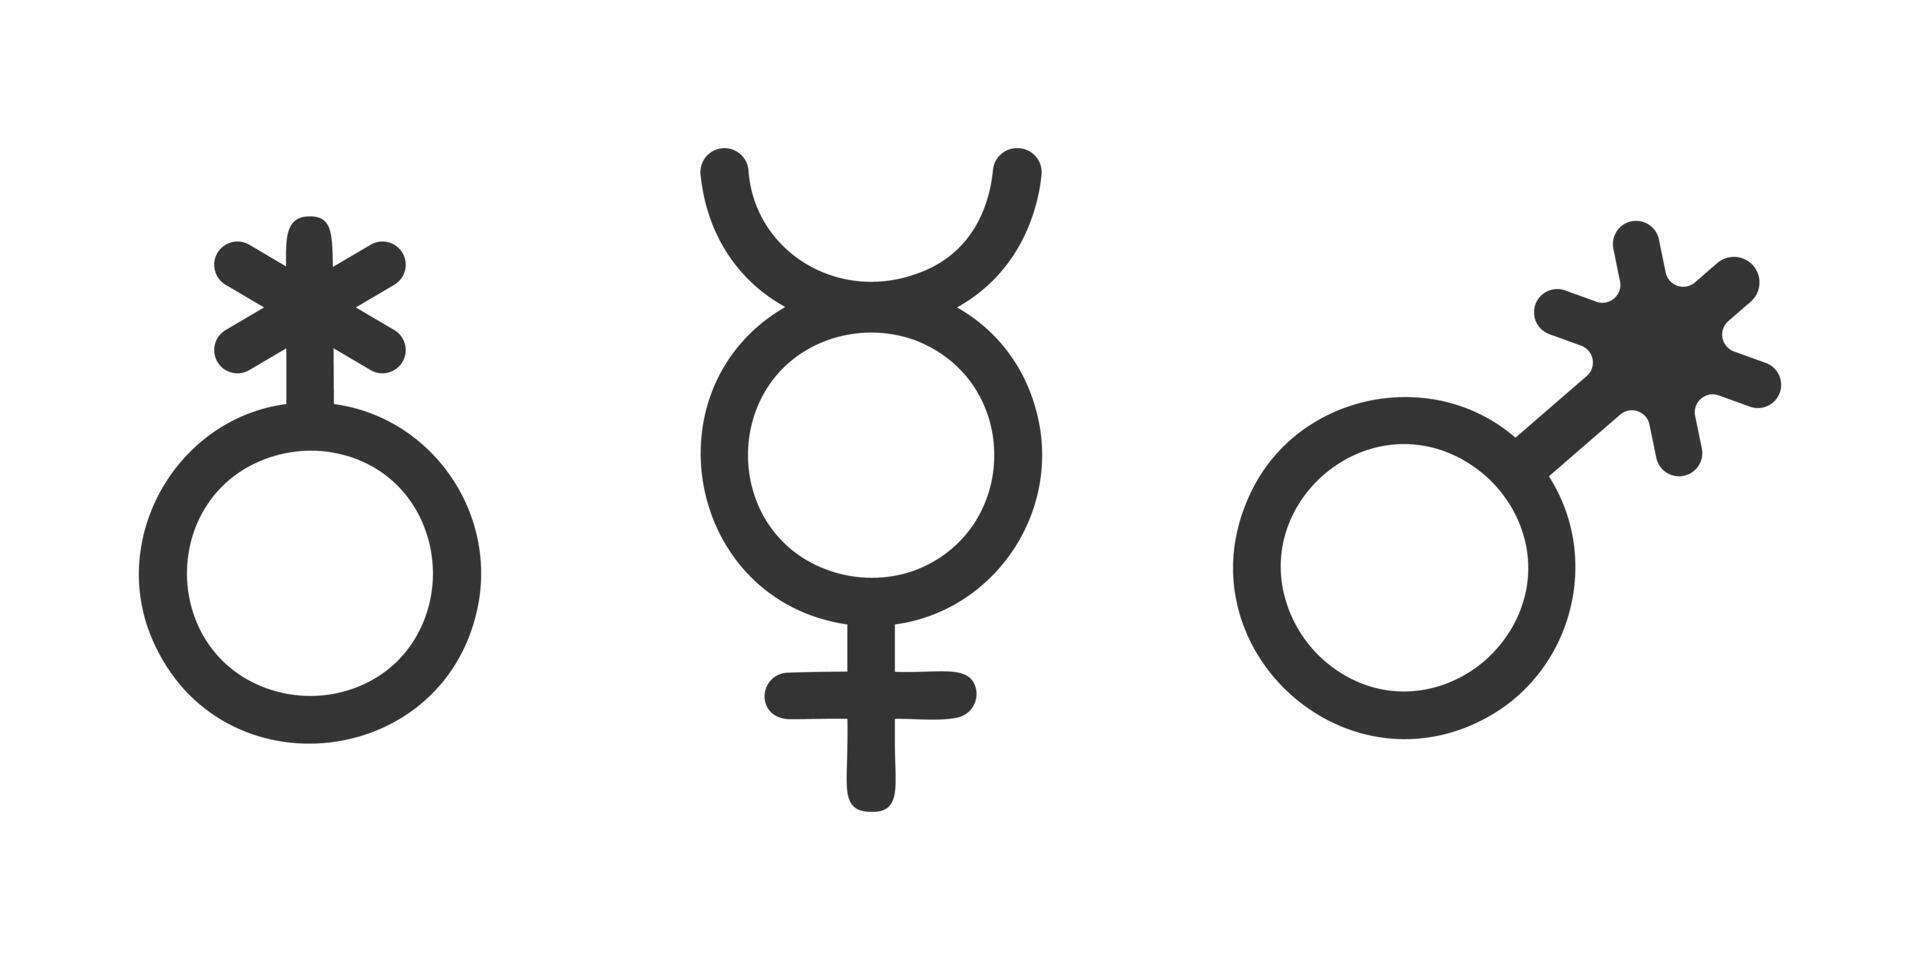 Set of non binary icons. Public restroom or locker room symbols for genderless persons isolated on white background. Gender identity concept vector